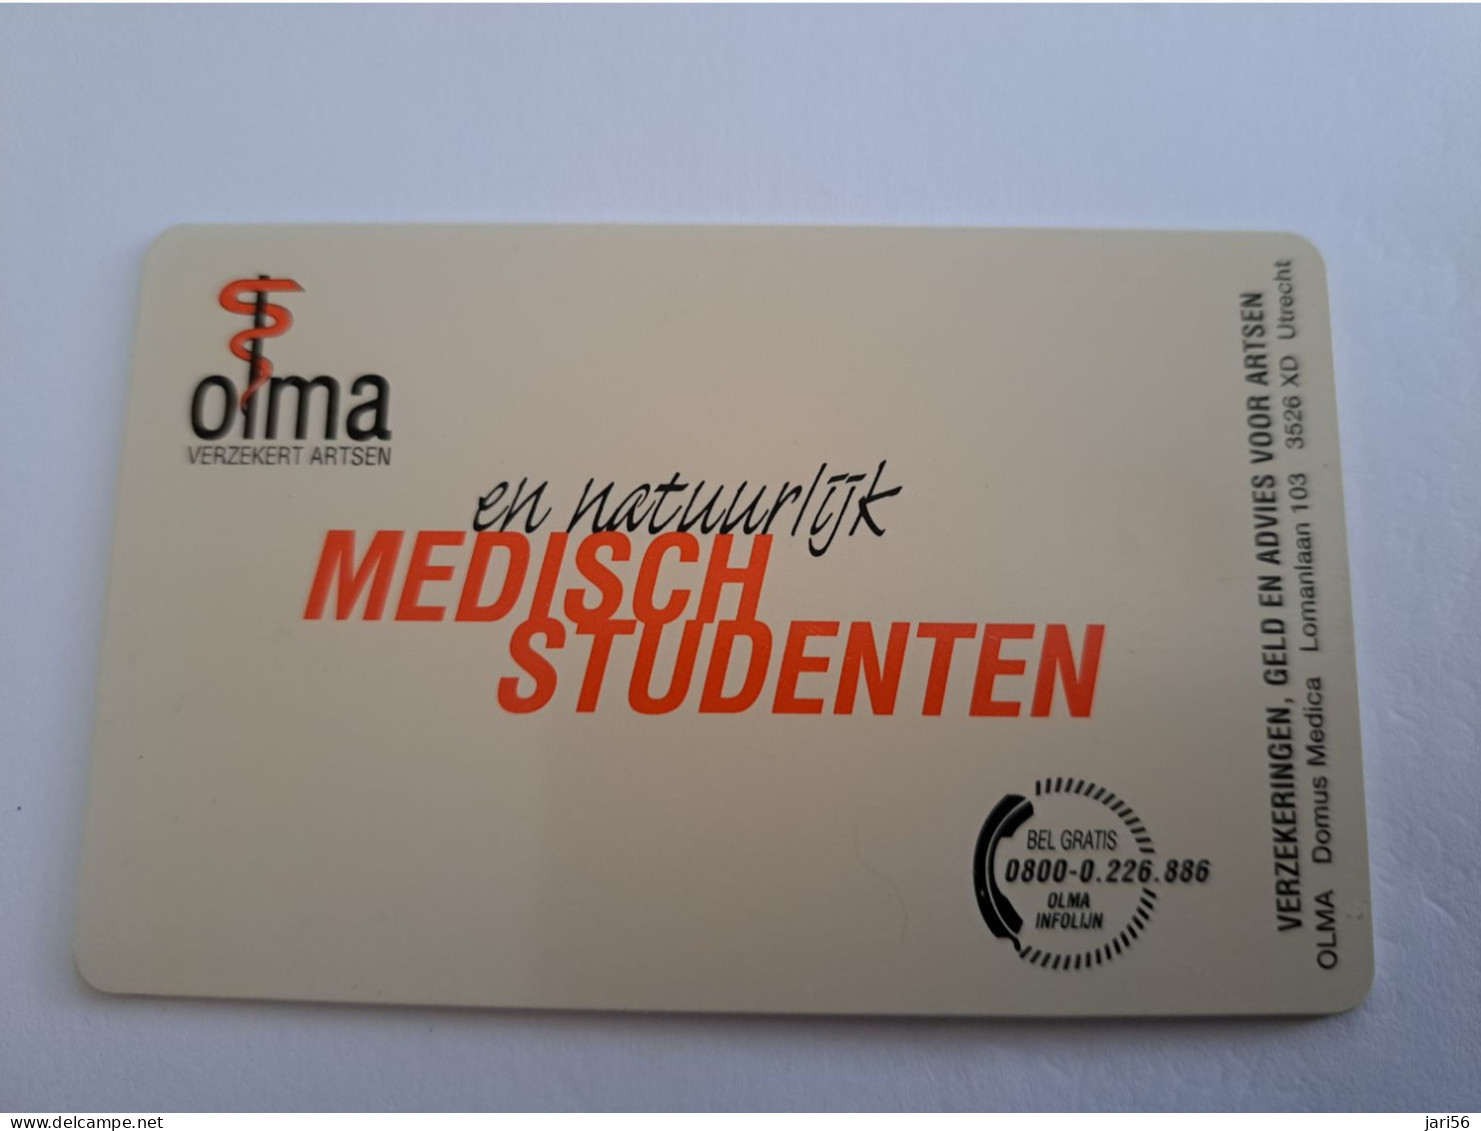 NETHERLANDS / CHIP ADVERTISING CARD/ HFL 5,00  / OLMA/ MEDICAL STUDENTS     /     CRE 381 ** 14588** - Private